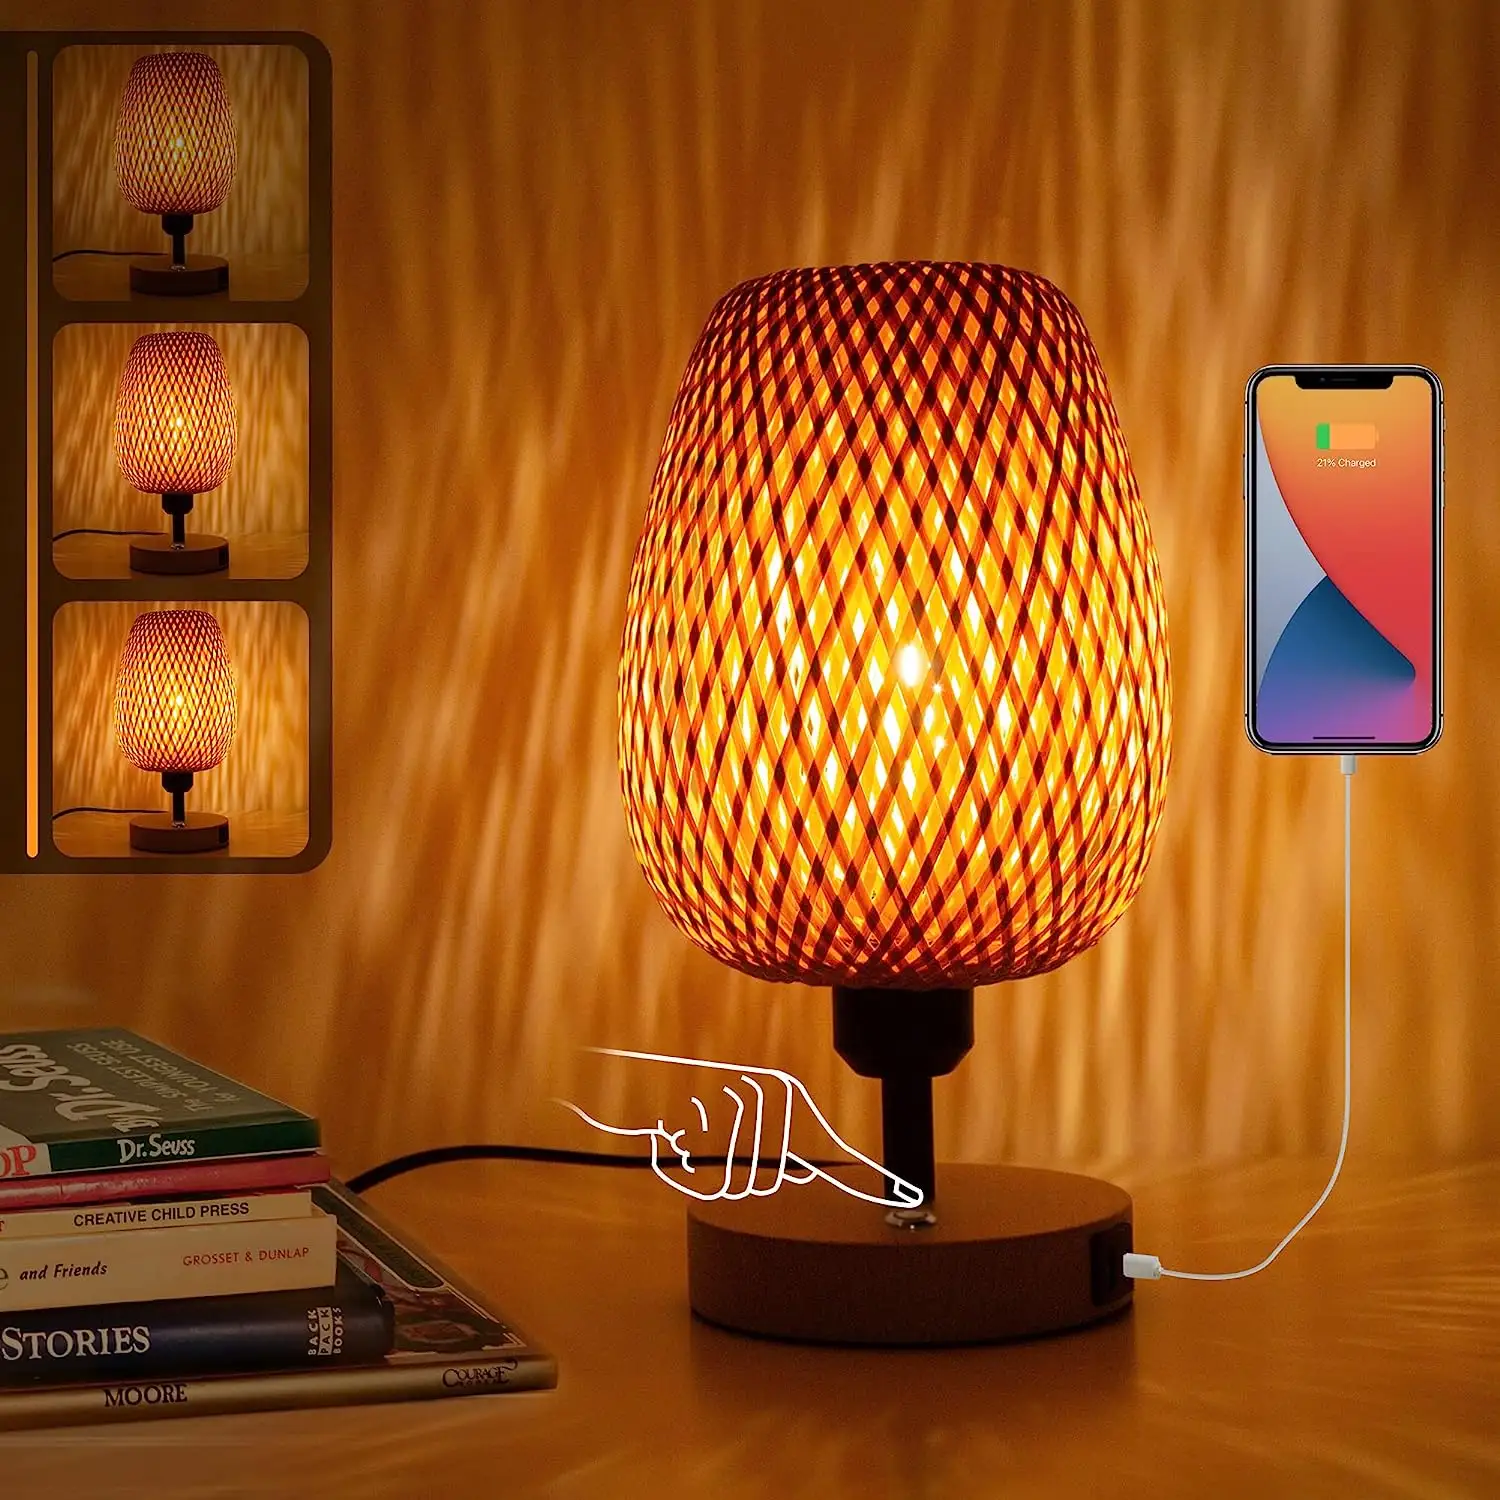 Hollow Bamboo shade Living Room Decorative Lighting 2 USB Ports Type C Type A Touch Dimming 3 Levels Brightness LED Table Lamp